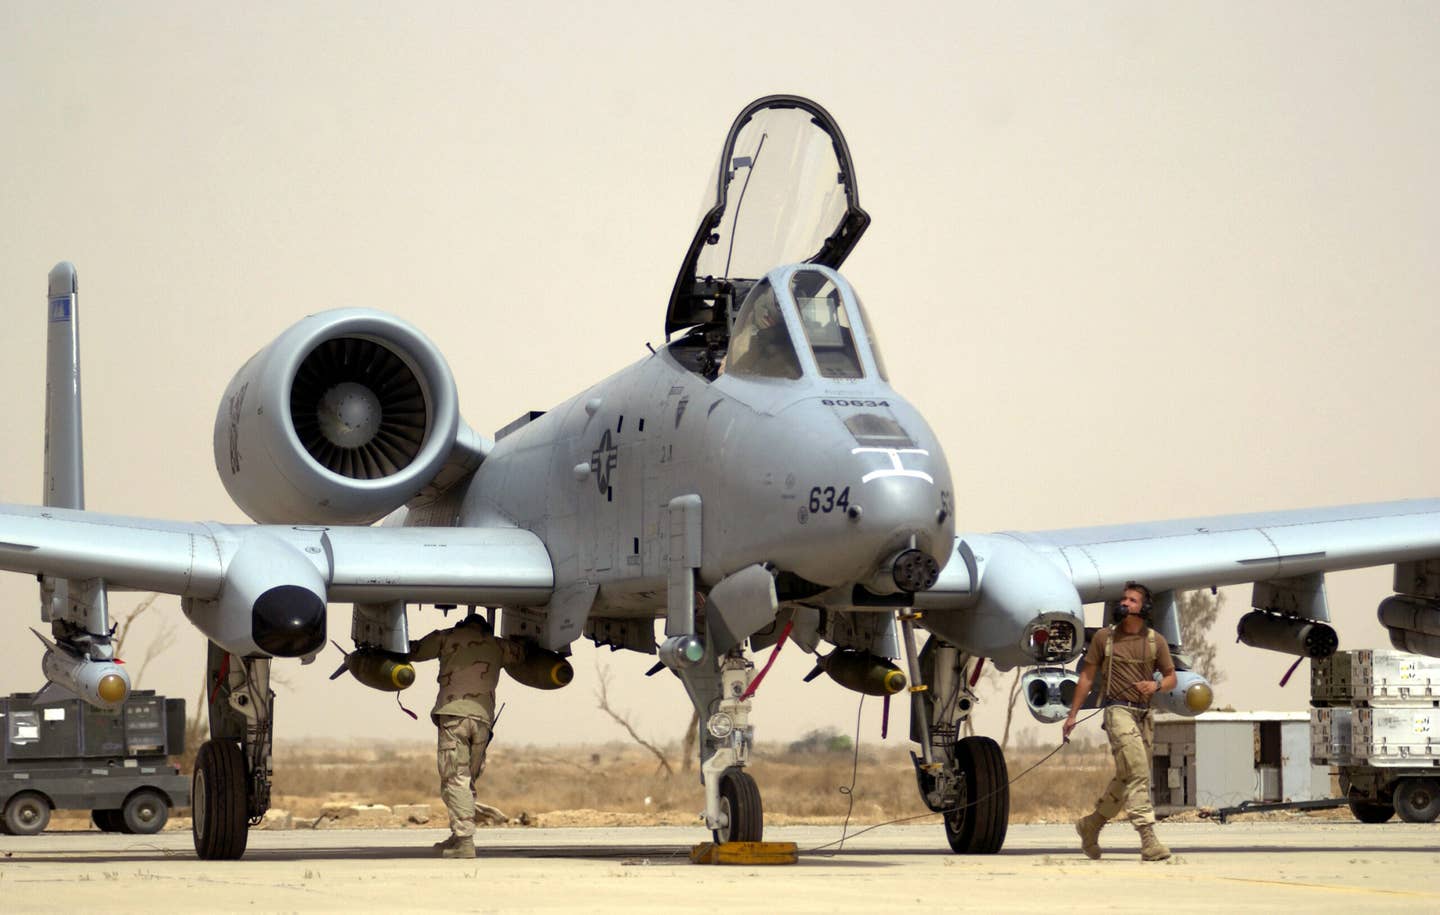 Crew chiefs with the 392nd Air Expeditionary Wing conduct pre-flight checks on an A-10 at a forward-deployed location supporting Operation Iraqi Freedom, in March 2003. This jet carries a mixture of unguided bombs, AGM-65 Mavericks, and a pod for unguided rockets. <em>U.S. Air Force photo by Staff Sgt. Shane A. Cuomo</em>